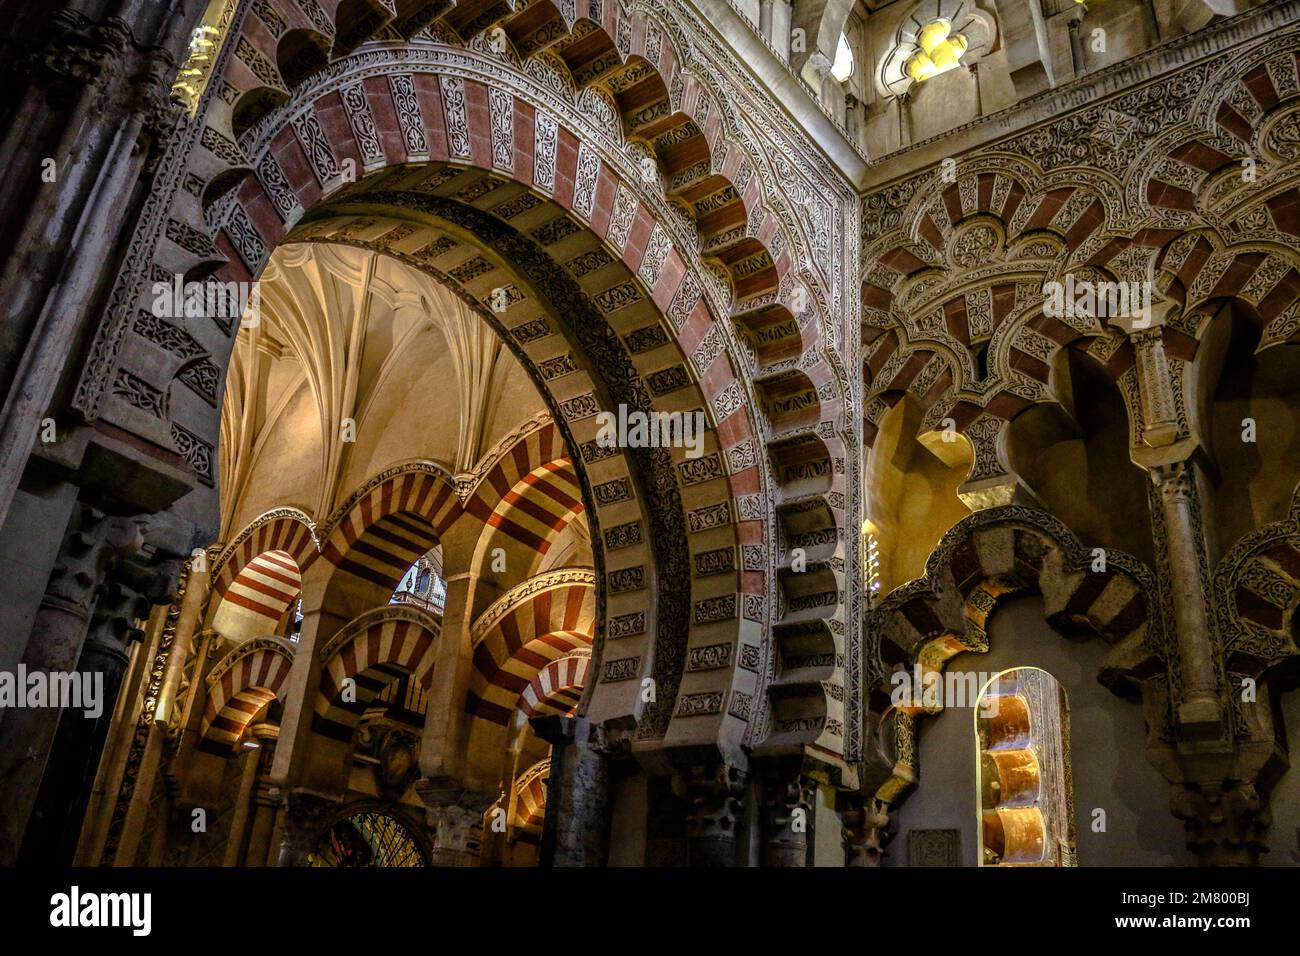 Interiors of La Mezquita, a historical Moorish mosque at Cordoba that was converted to a cathedral Stock Photo